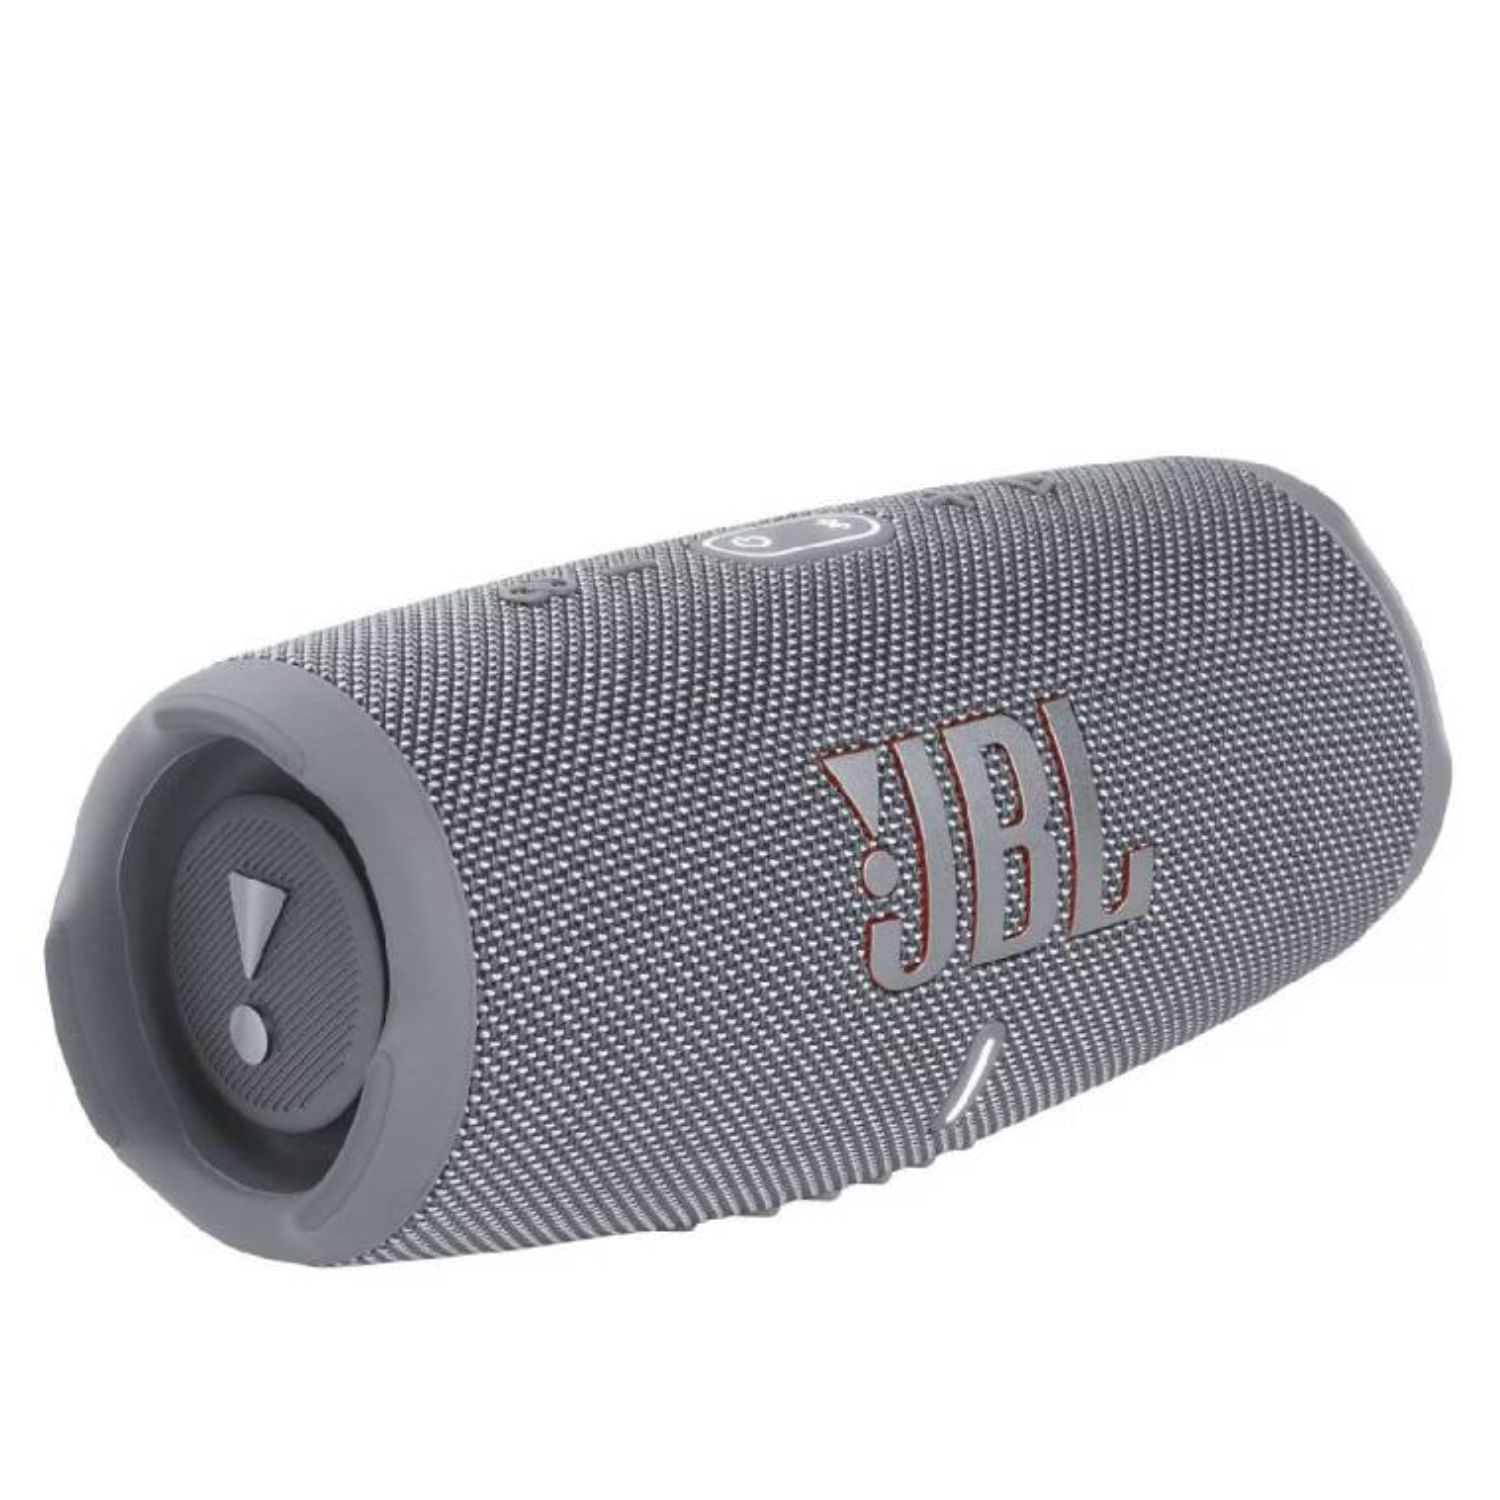 Parlante Jbl Charge 5 IP67 30 Watts Gris